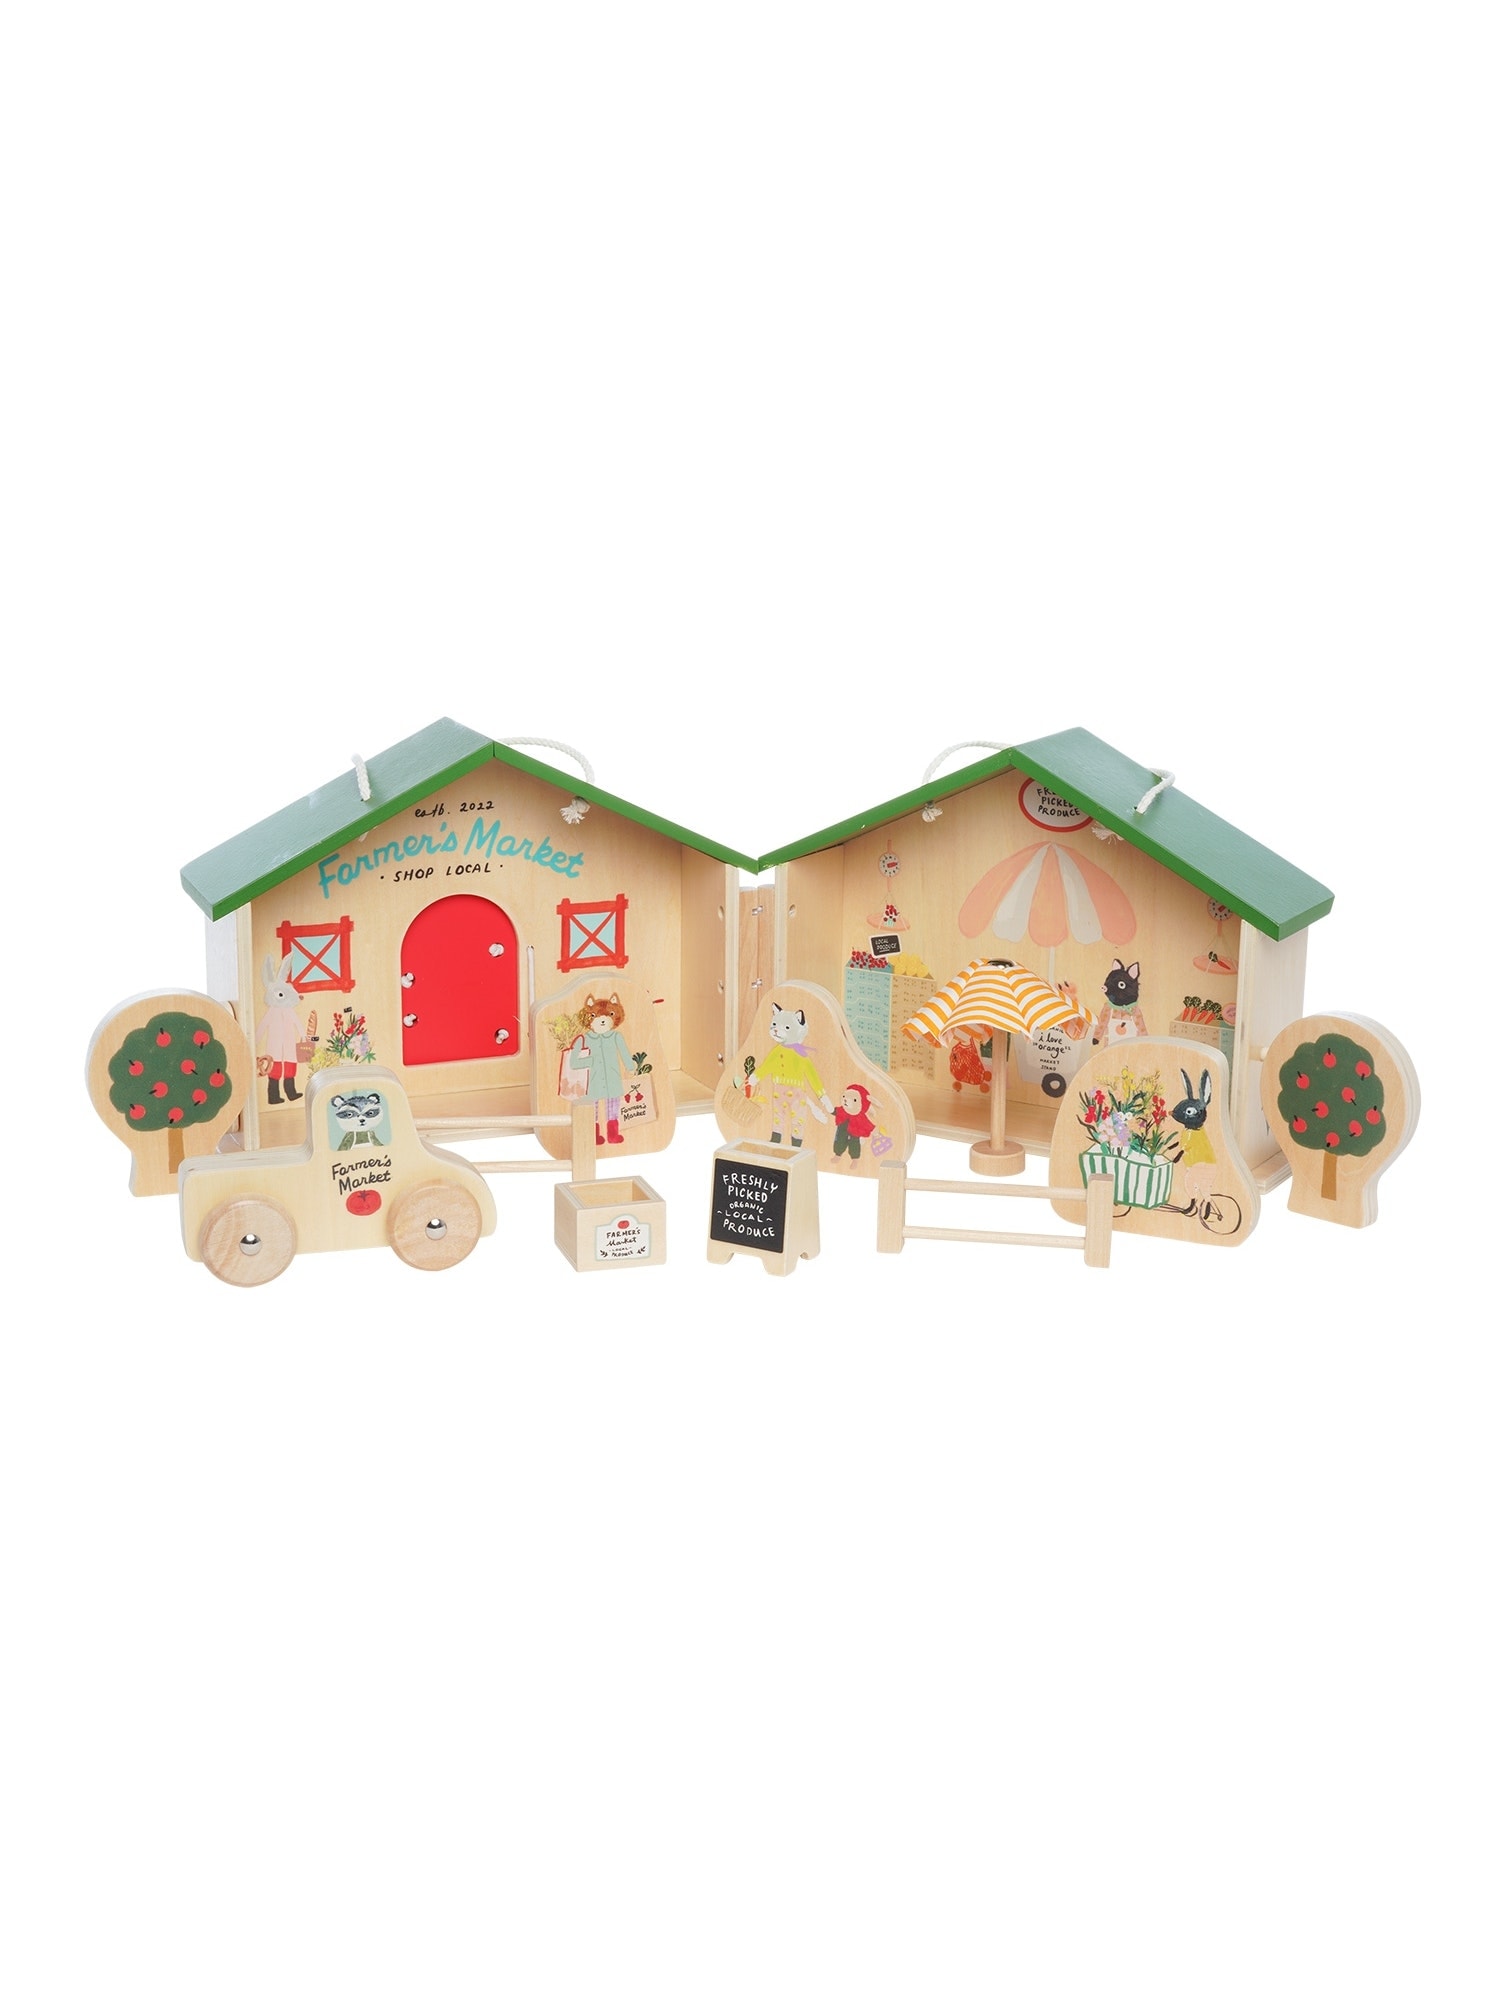 Farmers Market Day Portable Wooden Toy